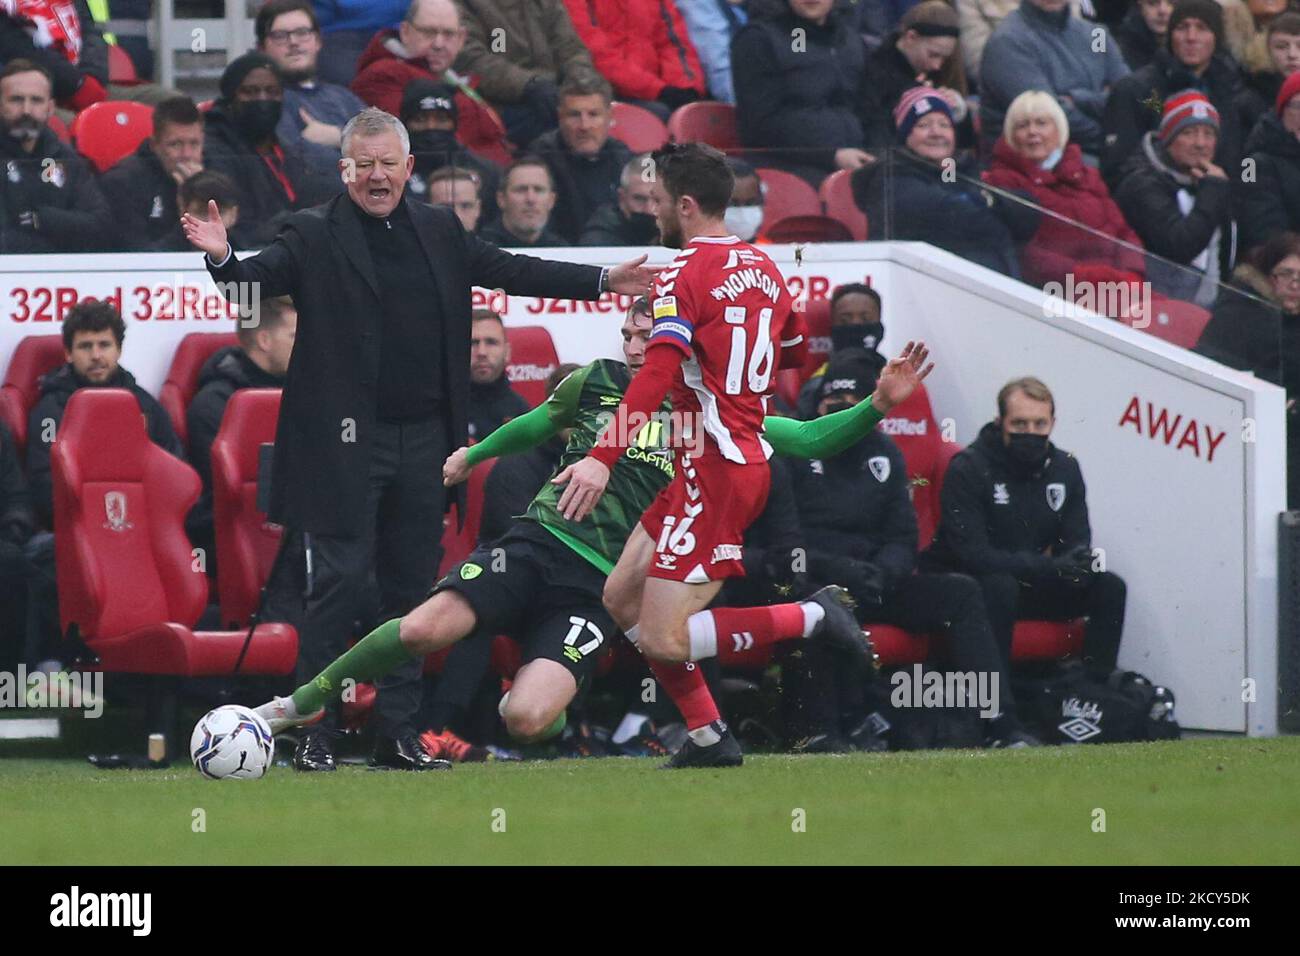 Middlesbrough Chris Wilder appeals against a tackle by Bournemouth's Jack Stacey during the Sky Bet Championship match between Middlesbrough and Bournemouth at the Riverside Stadium, Middlesbrough on Saturday 18th December 2021. (Photo by Michael Driver/MI News/NurPhoto) Stock Photo